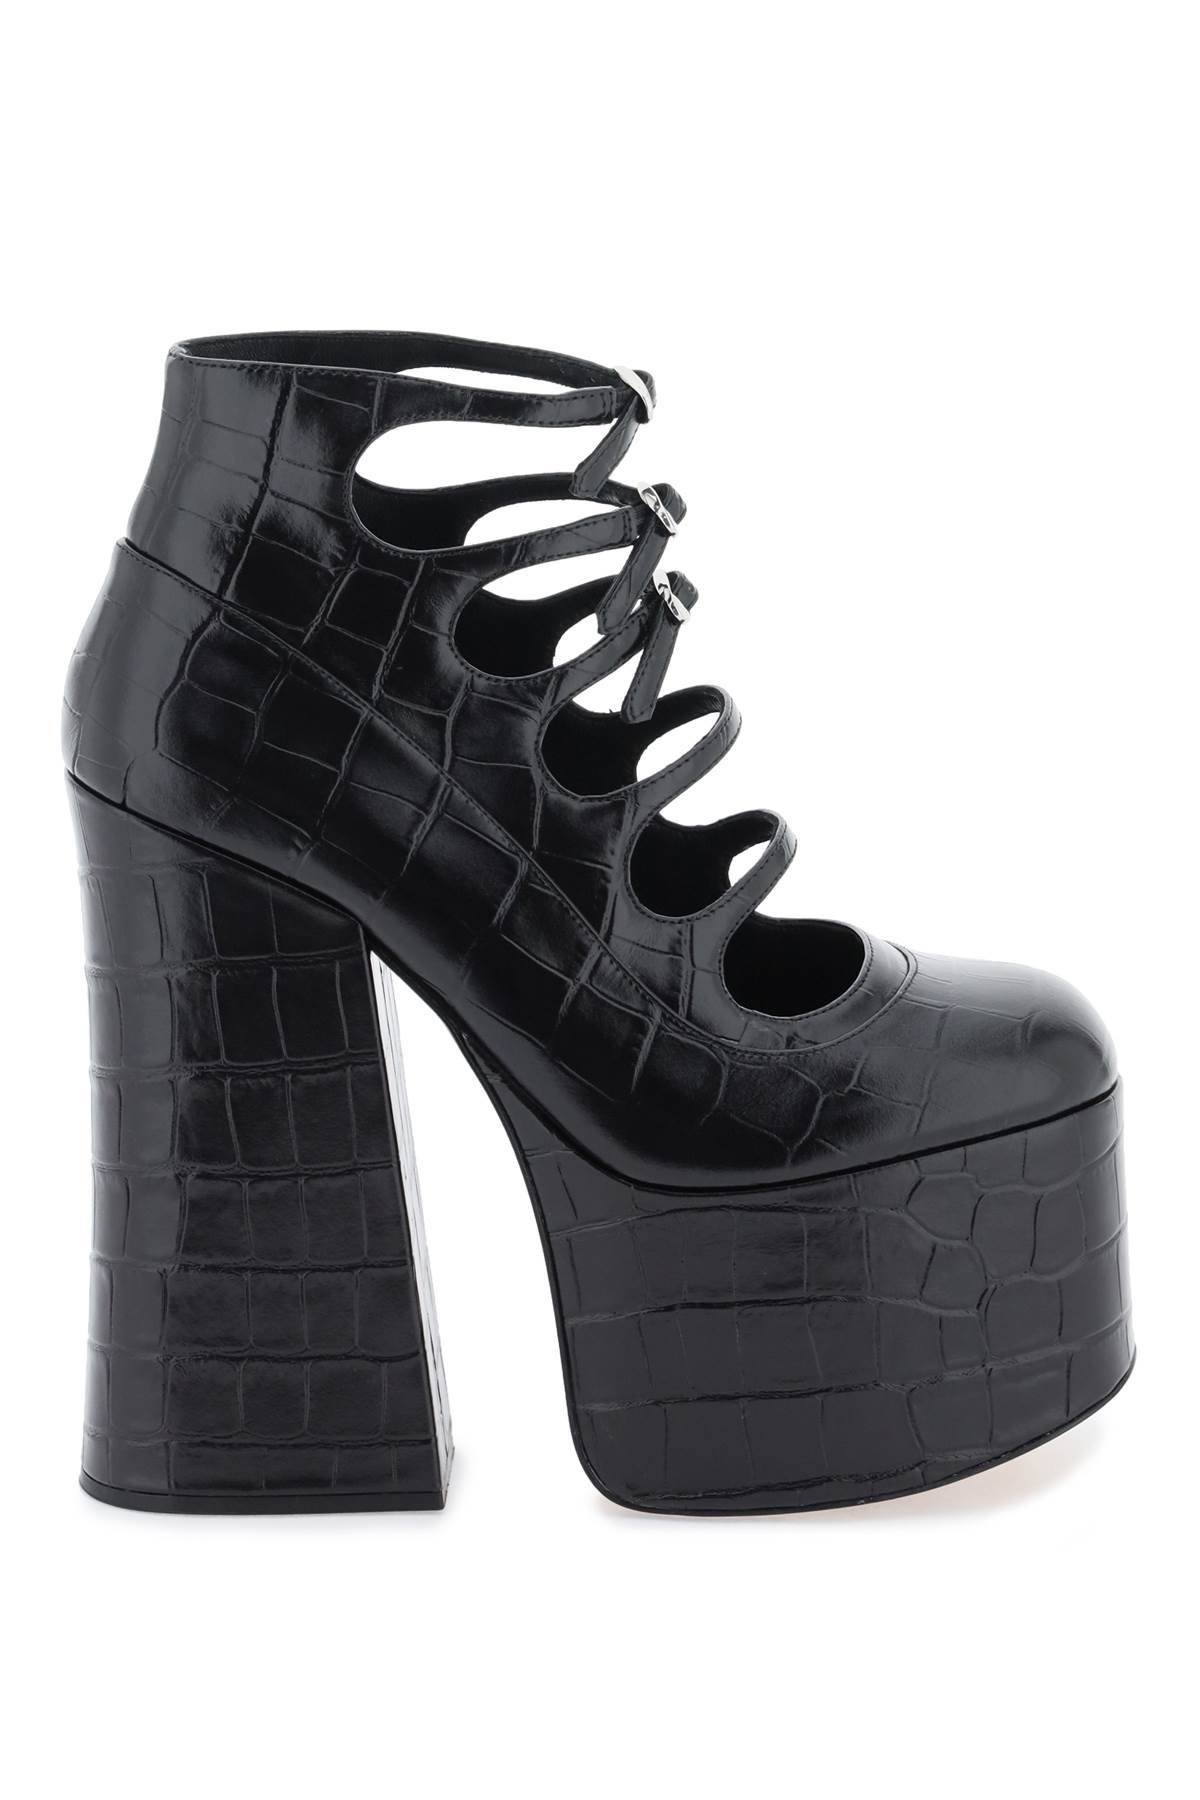 Marc Jacobs MARC JACOBS the croc embossed kiki ankle boots